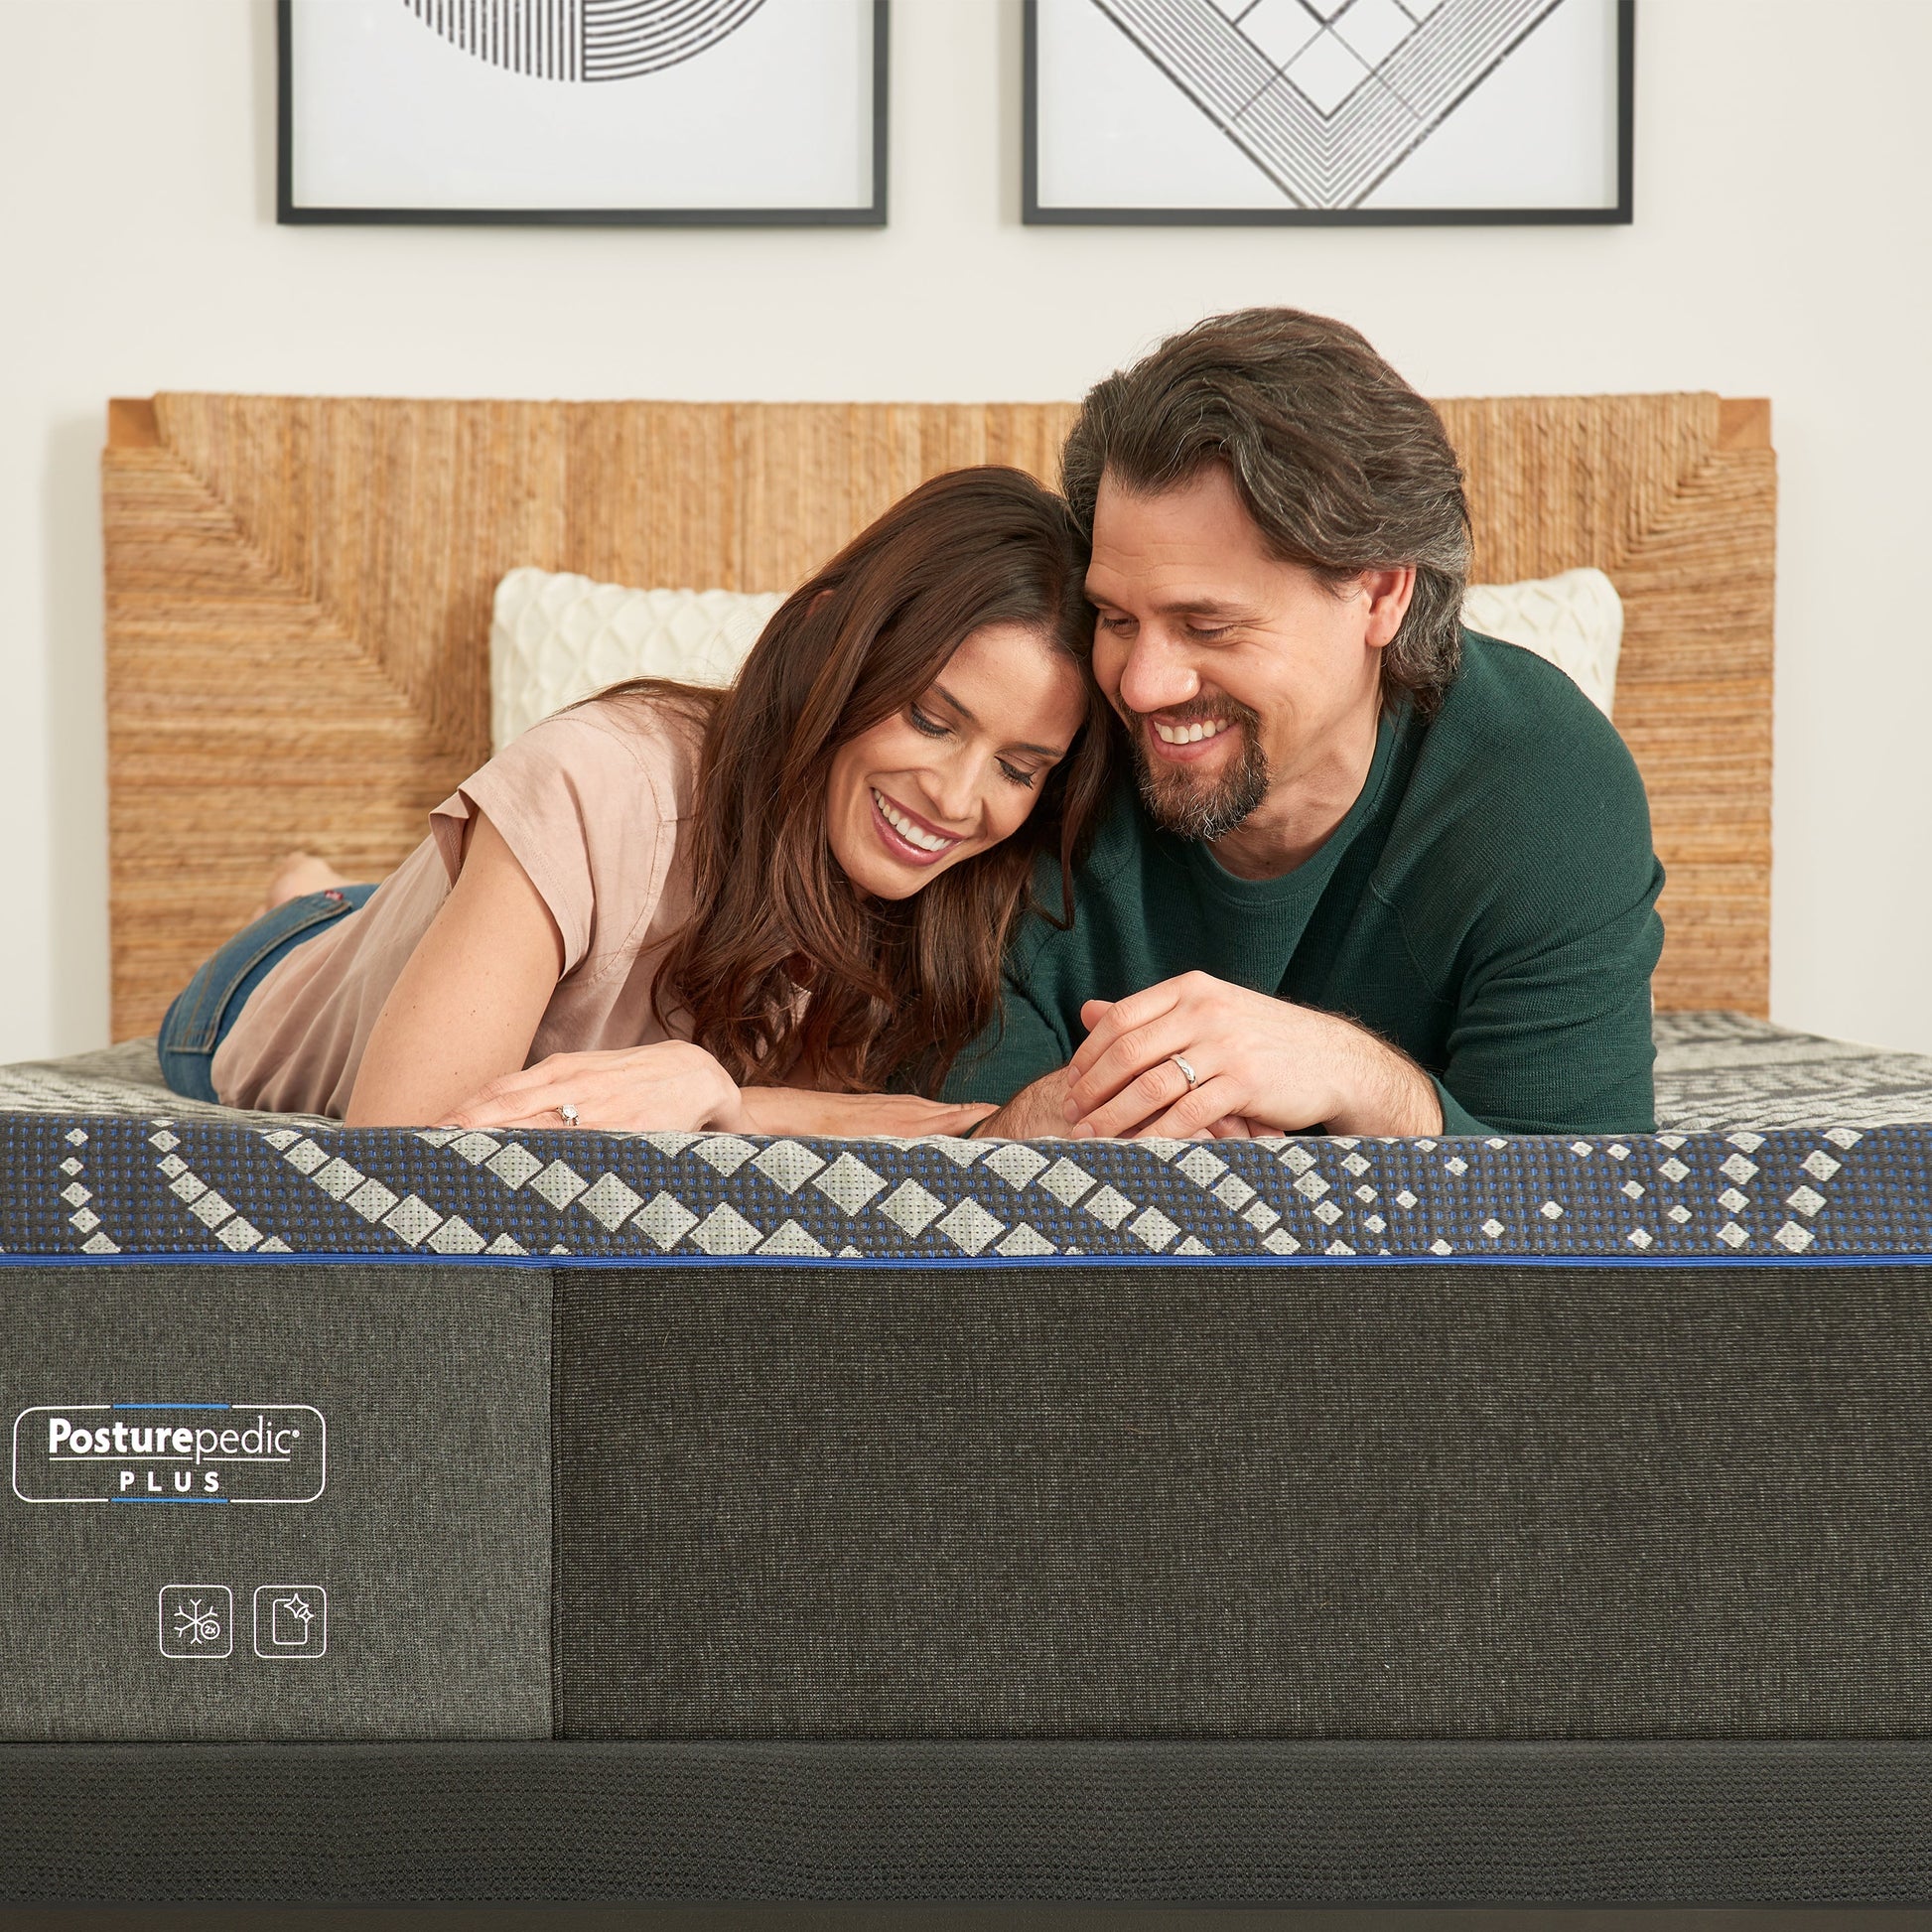 Couple Relaxing On A Sealy Albany Firm Mattress In Bedroom